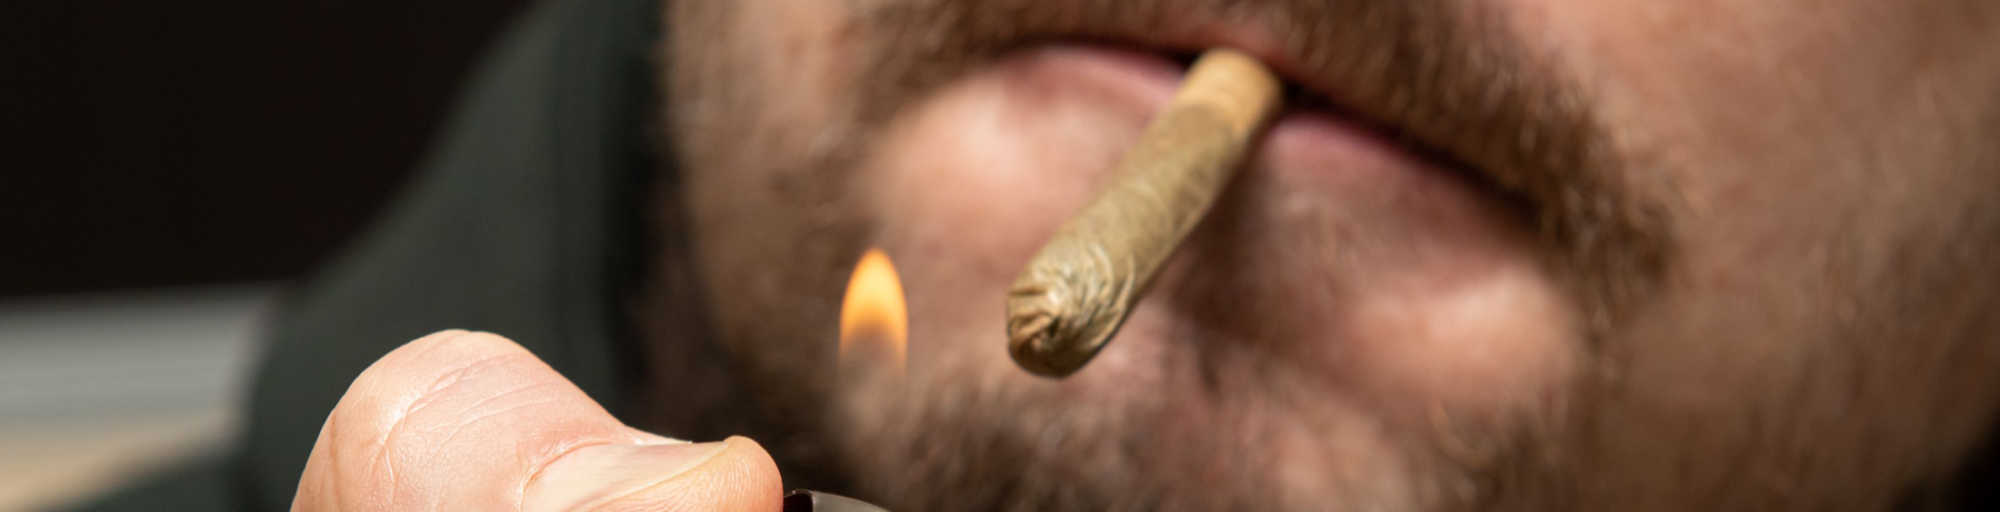 image of how to light hemp pre roll joint